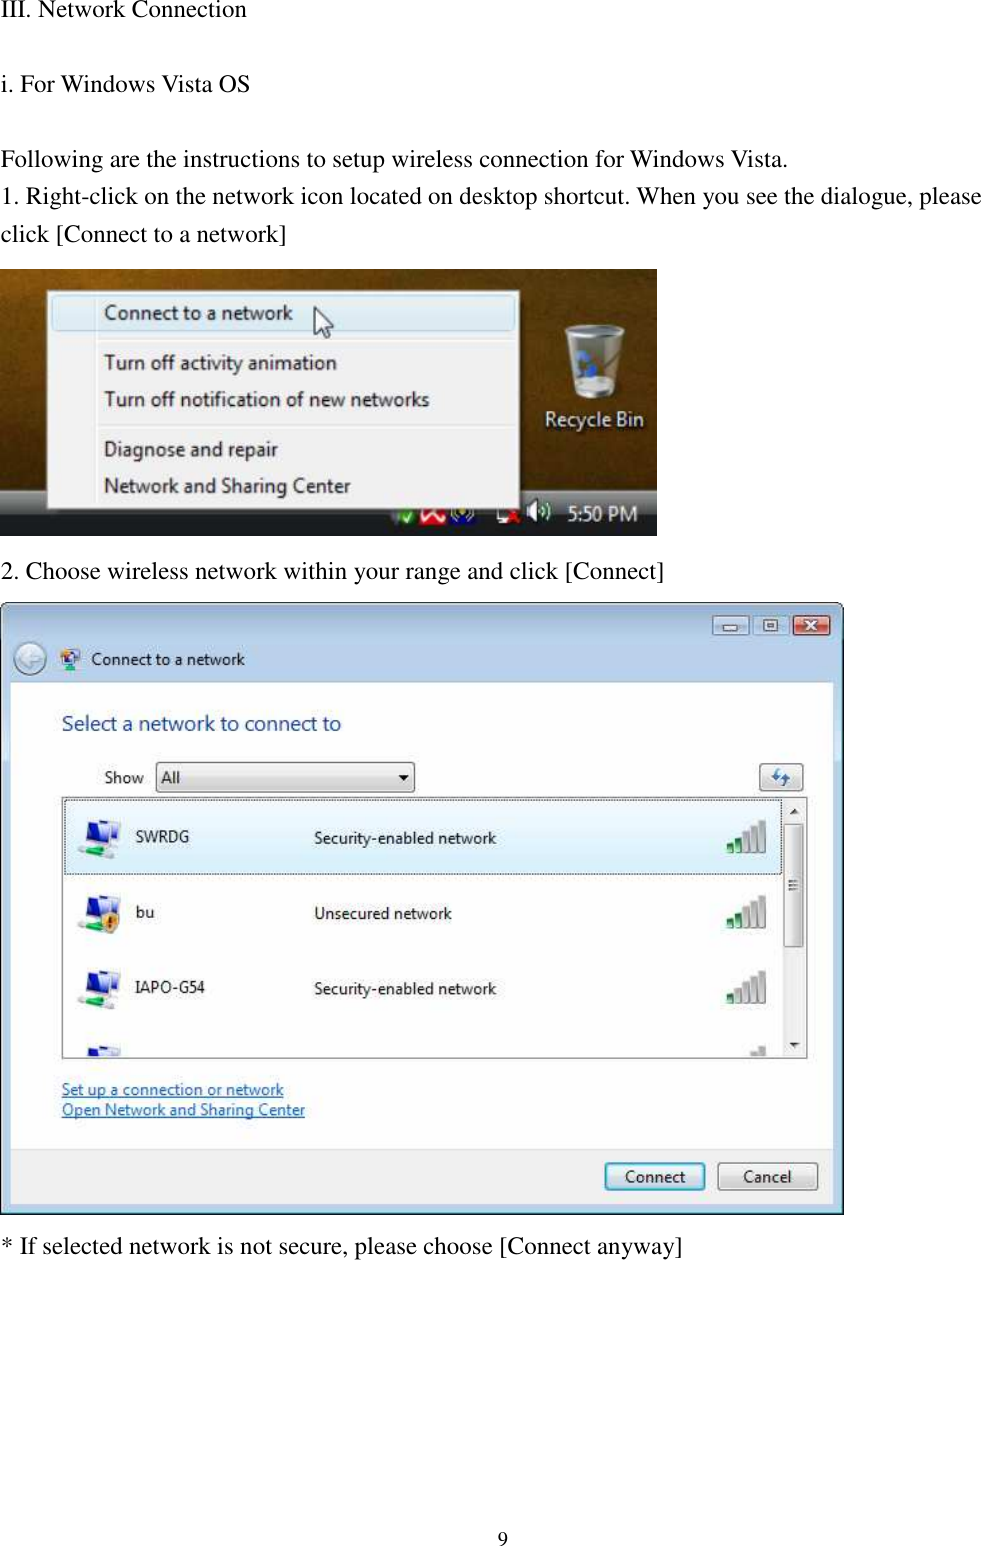   9 III. Network Connection  i. For Windows Vista OS  Following are the instructions to setup wireless connection for Windows Vista. 1. Right-click on the network icon located on desktop shortcut. When you see the dialogue, please click [Connect to a network]  2. Choose wireless network within your range and click [Connect]  * If selected network is not secure, please choose [Connect anyway]        